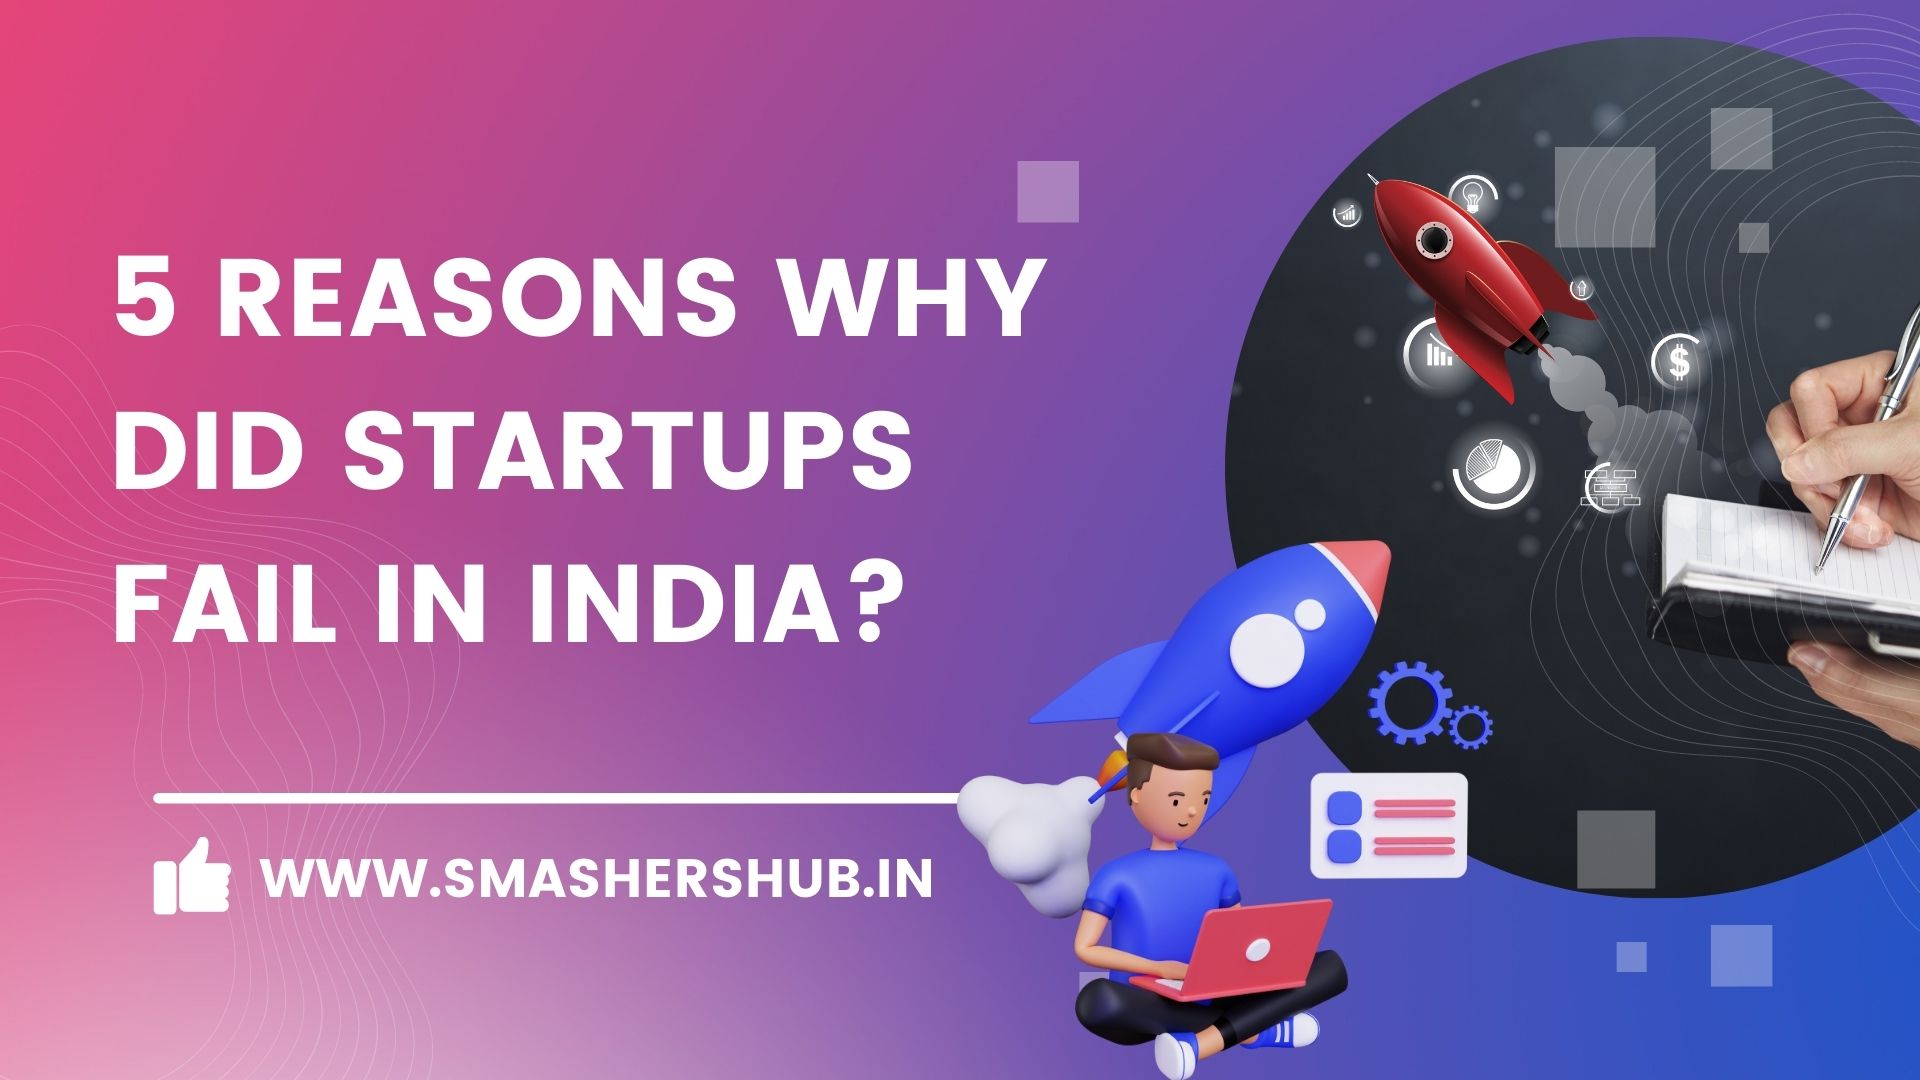 5 Reasons why did startups fail in India?